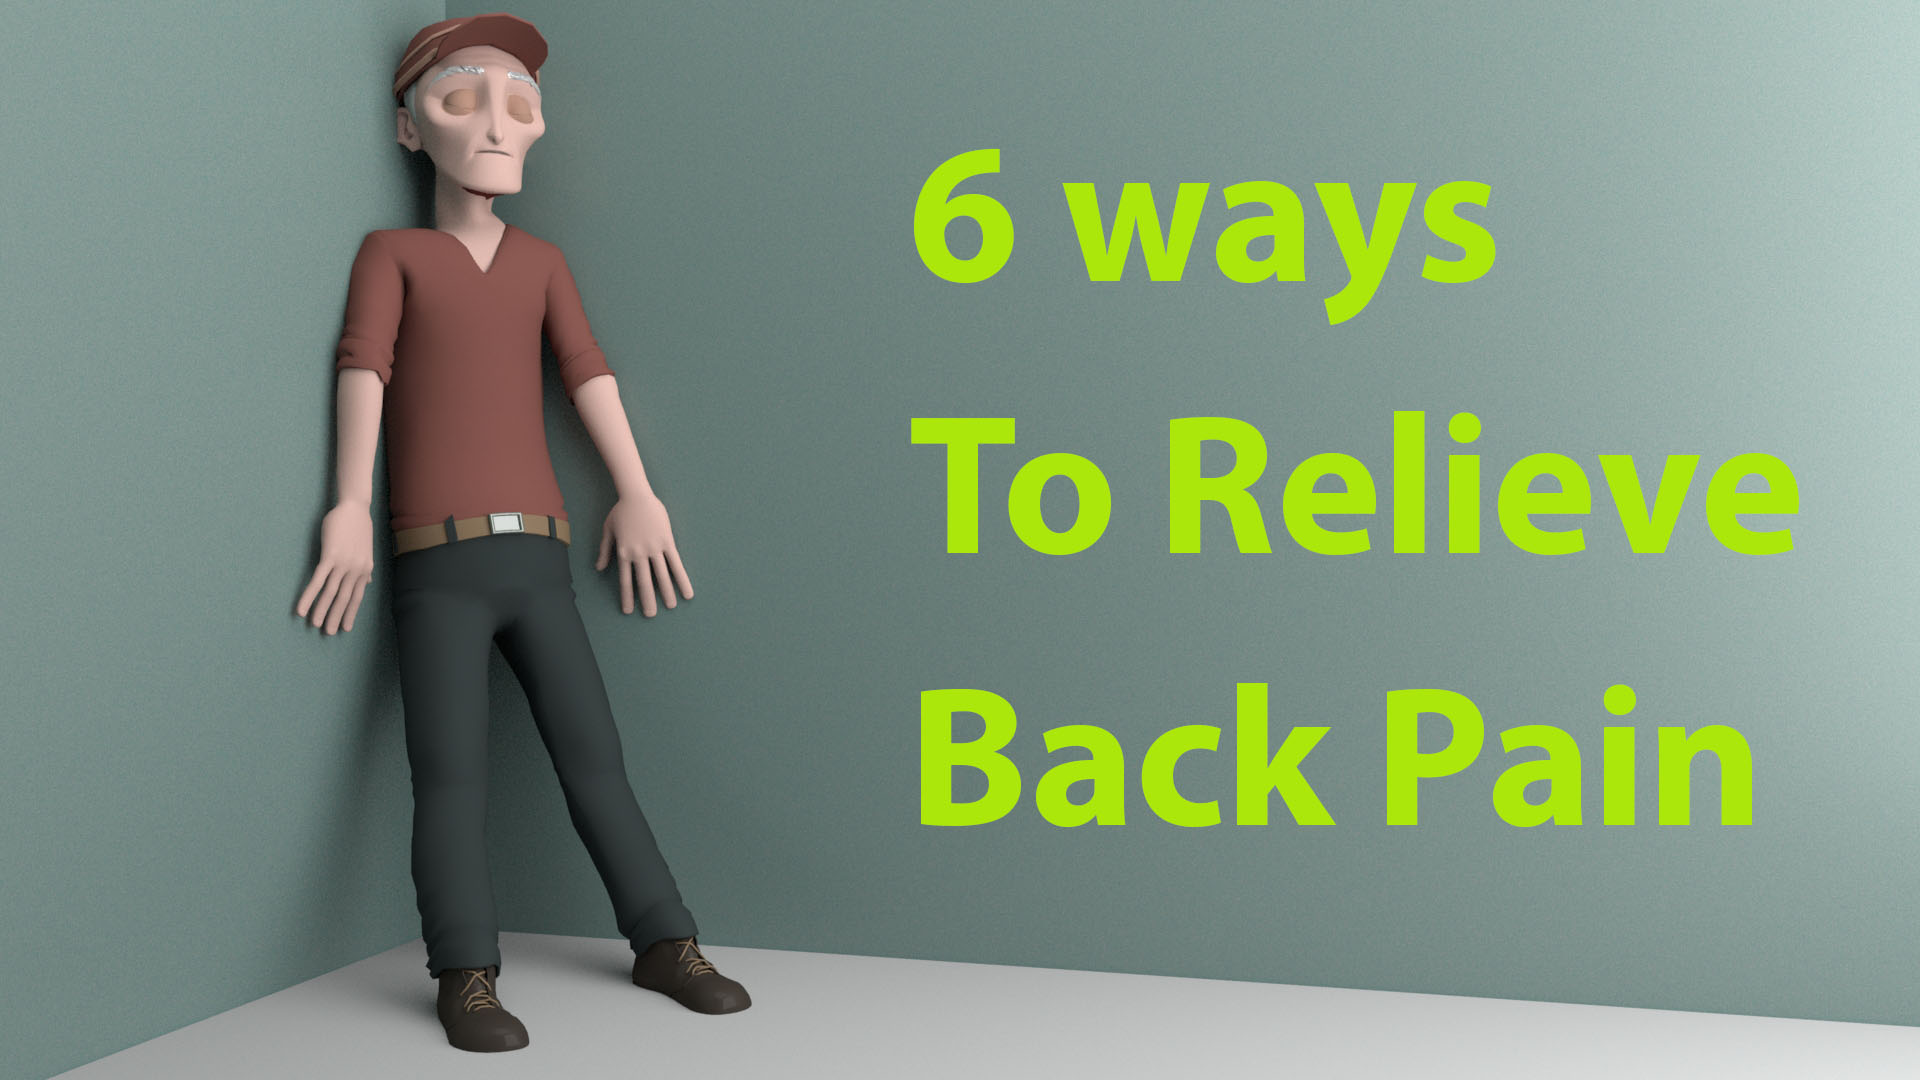 6 ways to relieve back pain